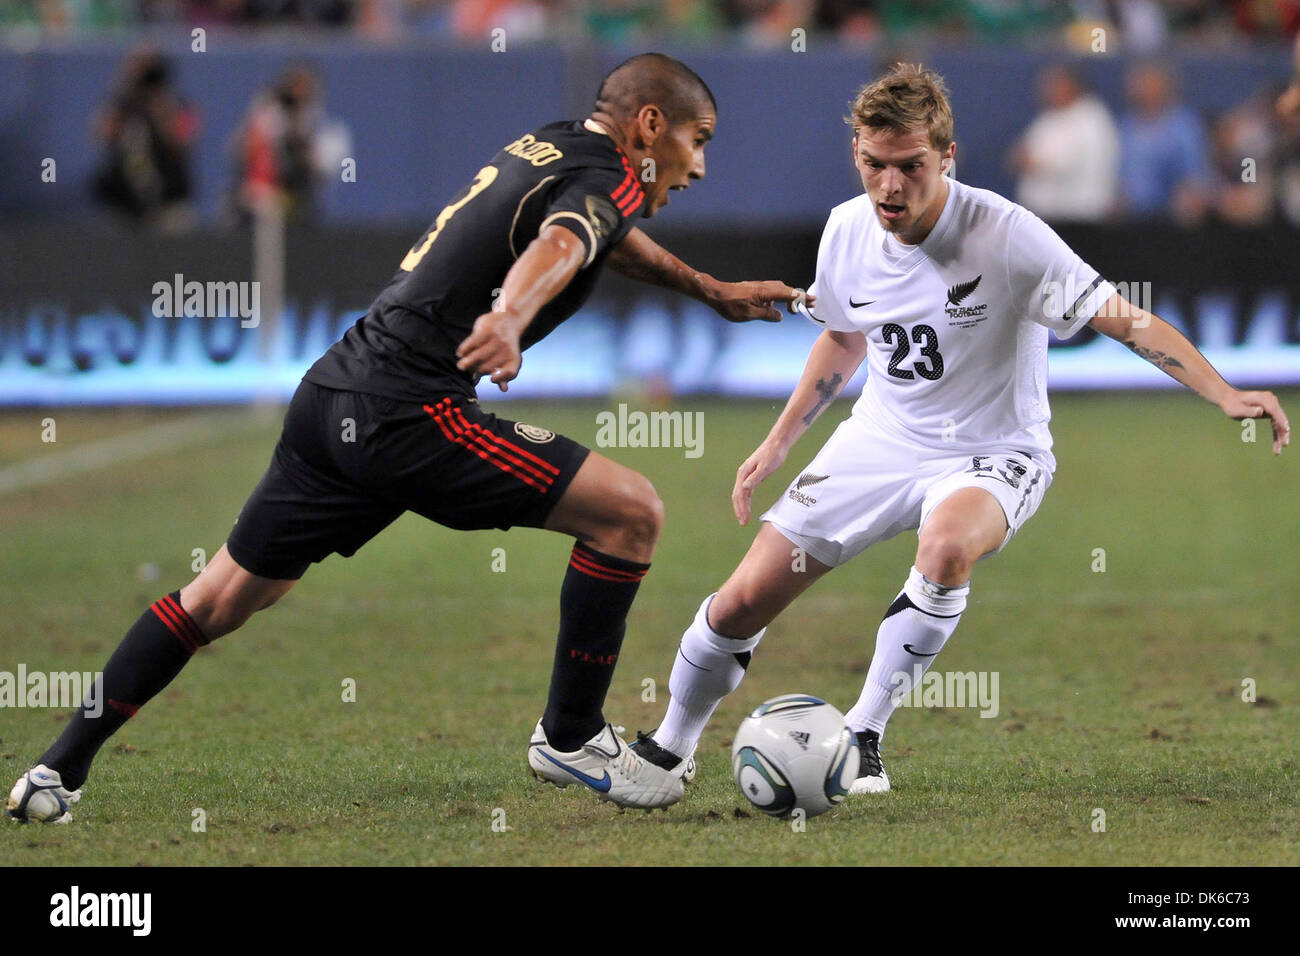 June 1, 2011 - Denver, Colorado, United States of America - Mexico's Carlos Salcido (3) tries to get around New Zealand's David Mulligan (23) at Invesco Field at Mile High. Mexico defeated New Zealand 3-0 (Credit Image: © Michael Furman/Southcreek Global/ZUMAPRESS.com) Stock Photo